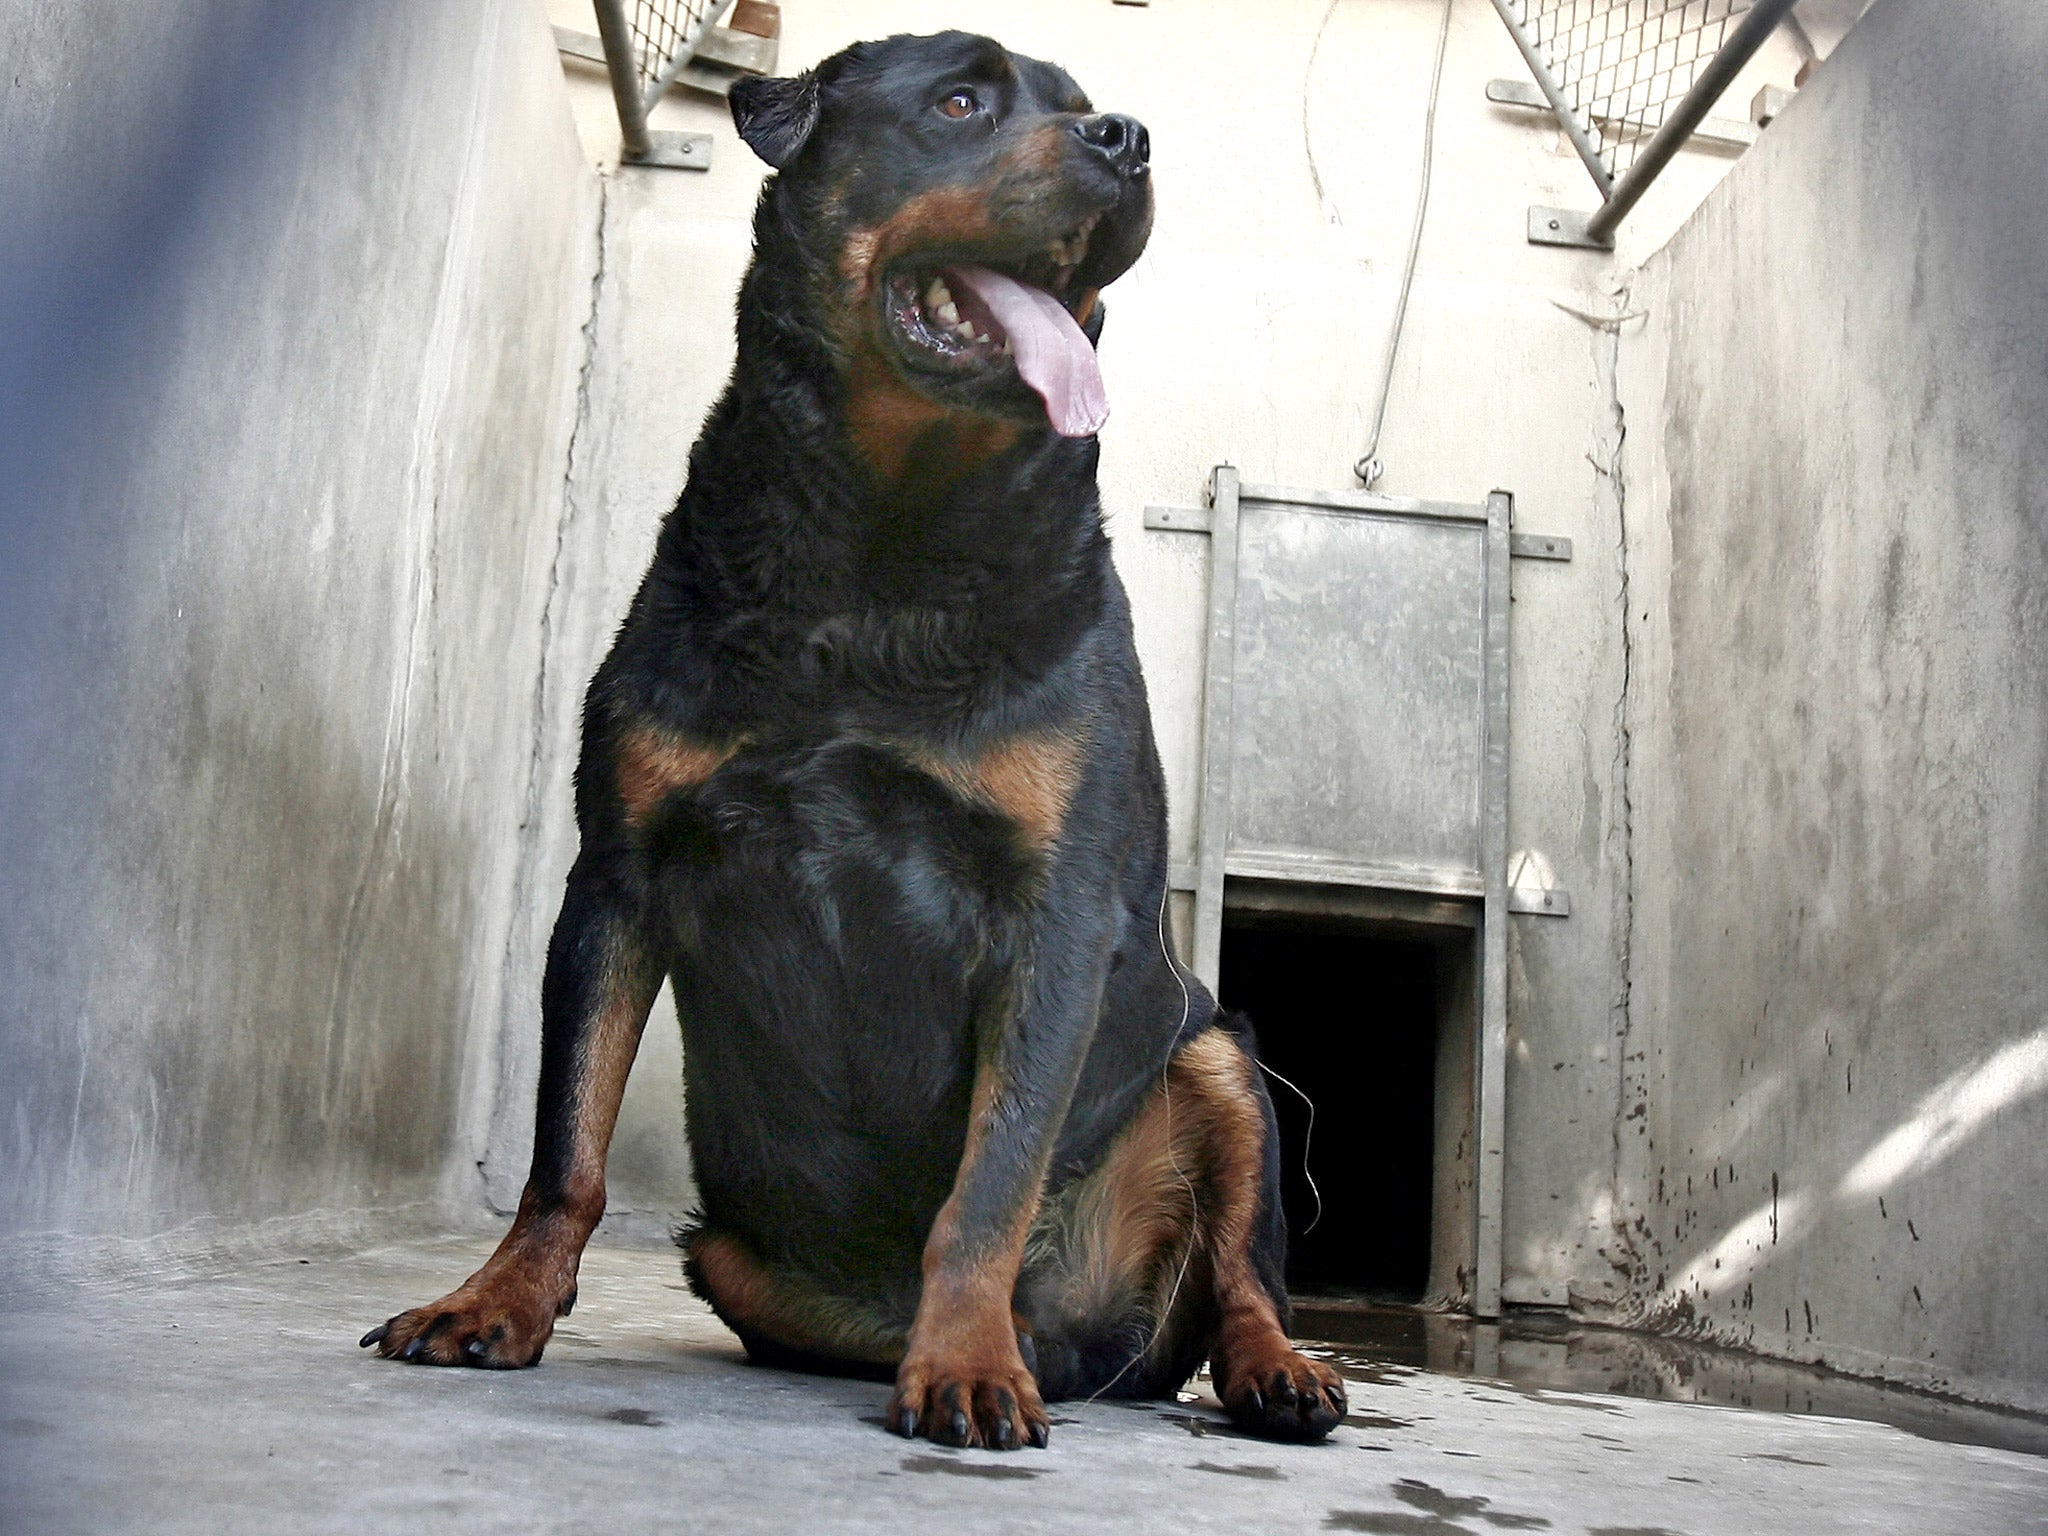 Rottweilers are often used as guard dogs